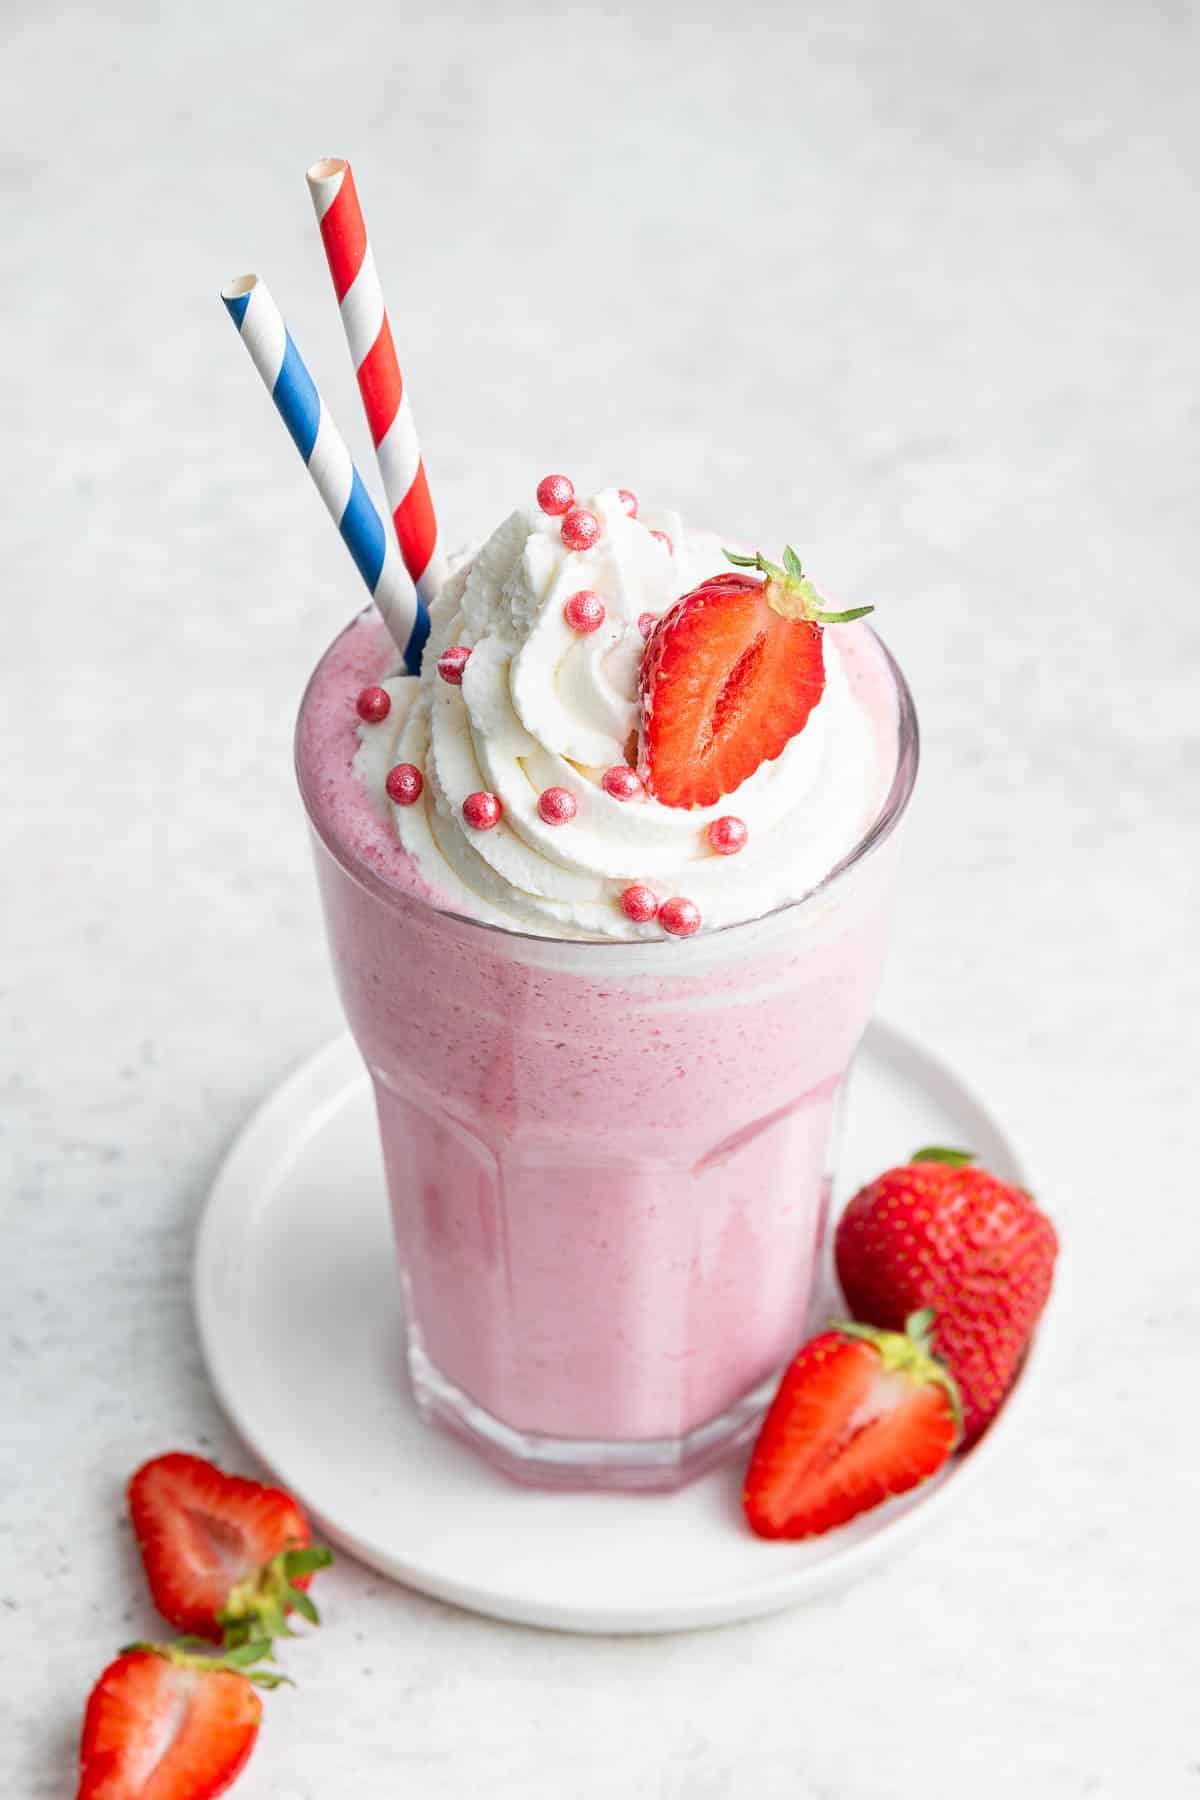 how to make a smoothie with milk and ice cream